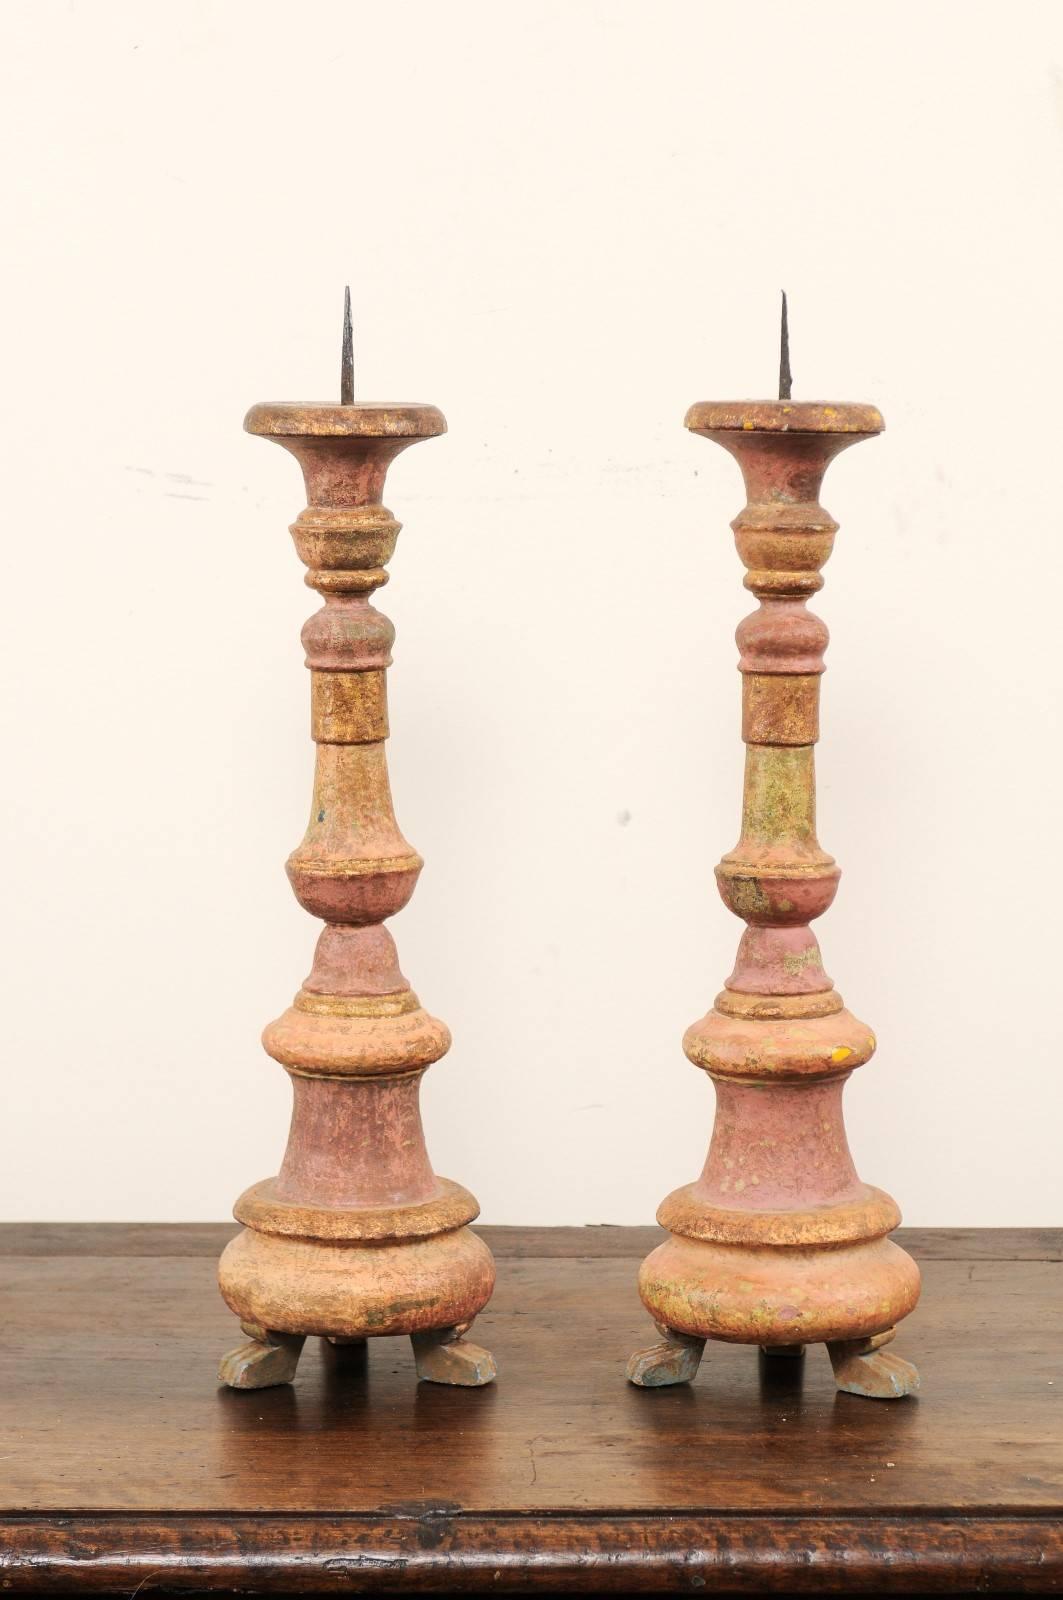 A pair of Portuguese 19th century wooden candlesticks. These antique candlesticks are from the former Portuguese enclave of Goa in India. They have carved, rounded bodies and are raised up on three feet, which project outward from the candlestick